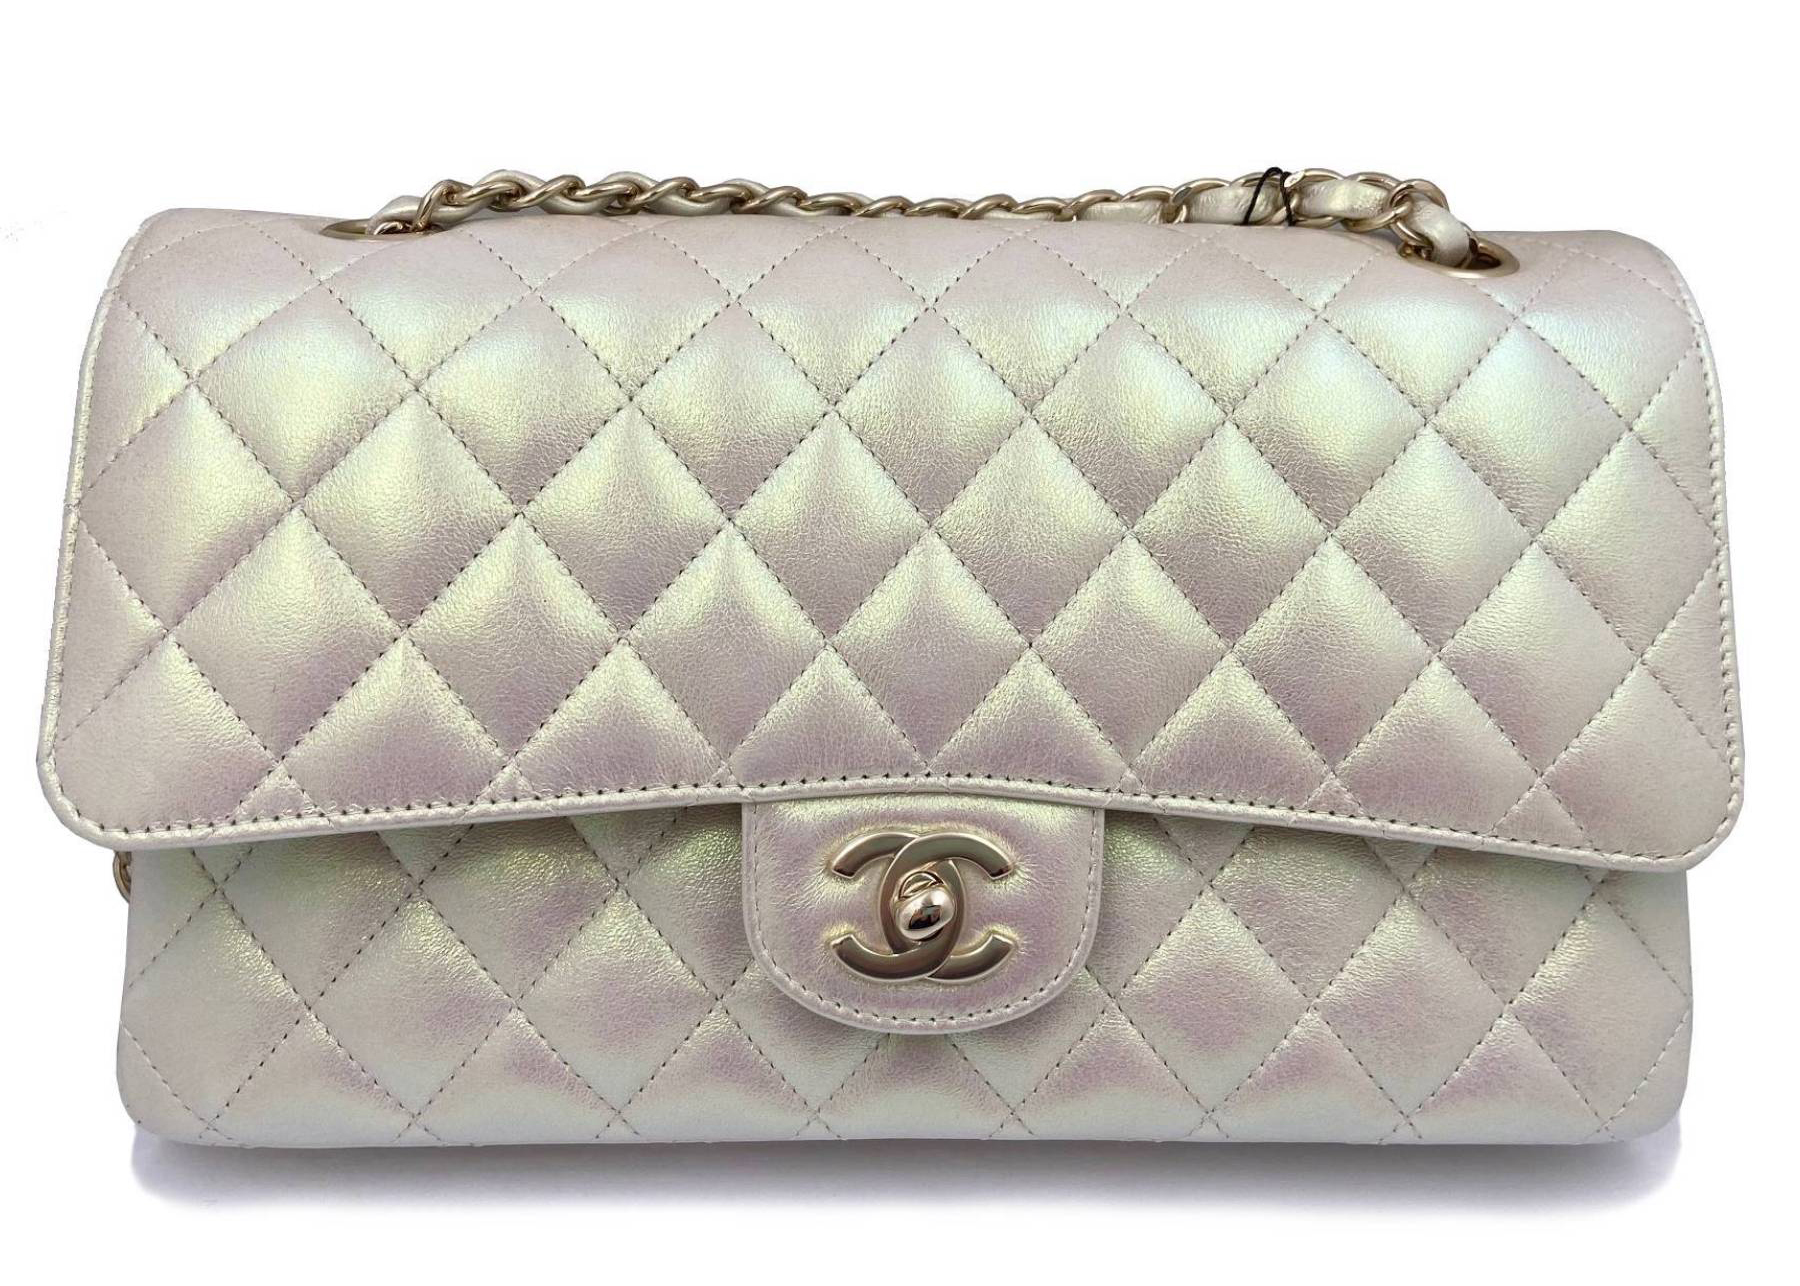 Chanel Classic Handbag Iridescent Ivory in Calfskin Leather with  Silvertone  US